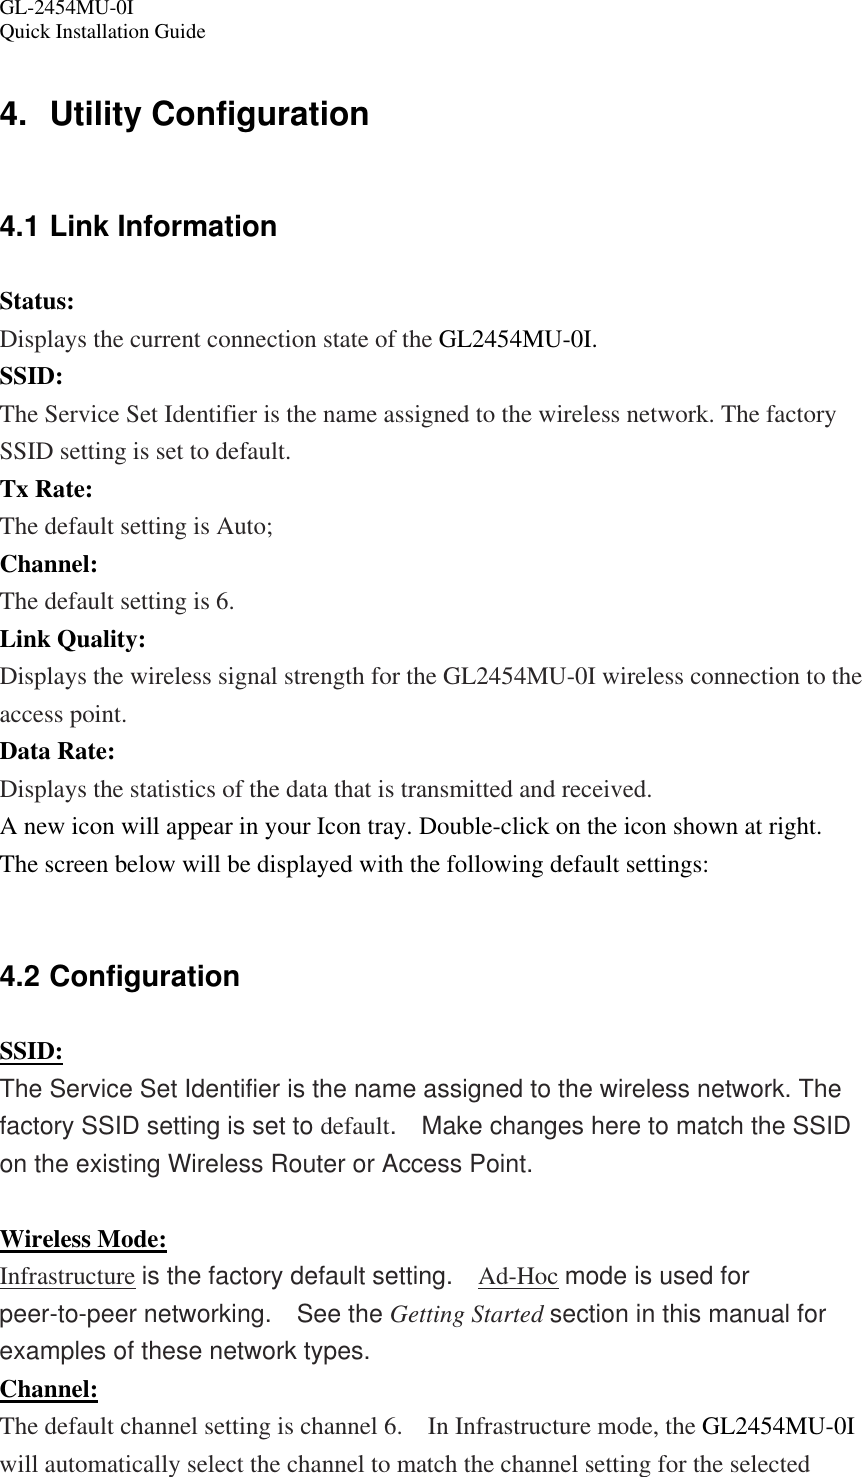 GL-2454MU-0I  Quick Installation Guide 4. Utility Configuration 4.1 Link Information Status: Displays the current connection state of the GL2454MU-0I. SSID: The Service Set Identifier is the name assigned to the wireless network. The factory SSID setting is set to default. Tx Rate: The default setting is Auto; Channel: The default setting is 6. Link Quality: Displays the wireless signal strength for the GL2454MU-0I wireless connection to the access point. Data Rate: Displays the statistics of the data that is transmitted and received. A new icon will appear in your Icon tray. Double-click on the icon shown at right.   The screen below will be displayed with the following default settings:  4.2 Configuration SSID: The Service Set Identifier is the name assigned to the wireless network. The factory SSID setting is set to default.    Make changes here to match the SSID on the existing Wireless Router or Access Point.  Wireless Mode: Infrastructure is the factory default setting.    Ad-Hoc mode is used for peer-to-peer networking.  See the Getting Started section in this manual for examples of these network types.  Channel: The default channel setting is channel 6.    In Infrastructure mode, the GL2454MU-0I will automatically select the channel to match the channel setting for the selected 